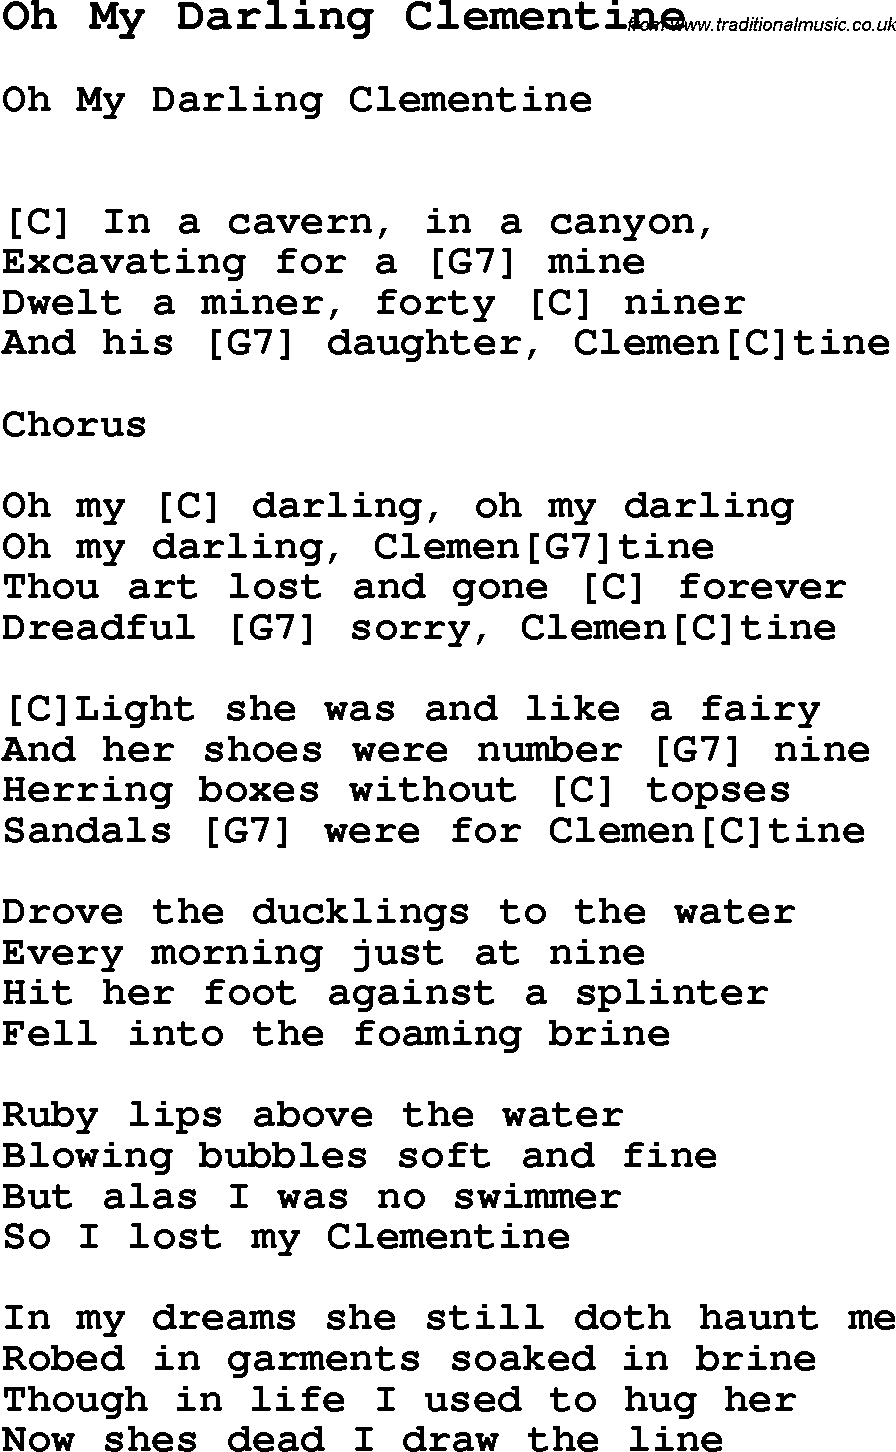 Song Oh My Darling Clementine, with lyrics for vocal performance and accompaniment chords for Ukulele, Guitar Banjo etc.